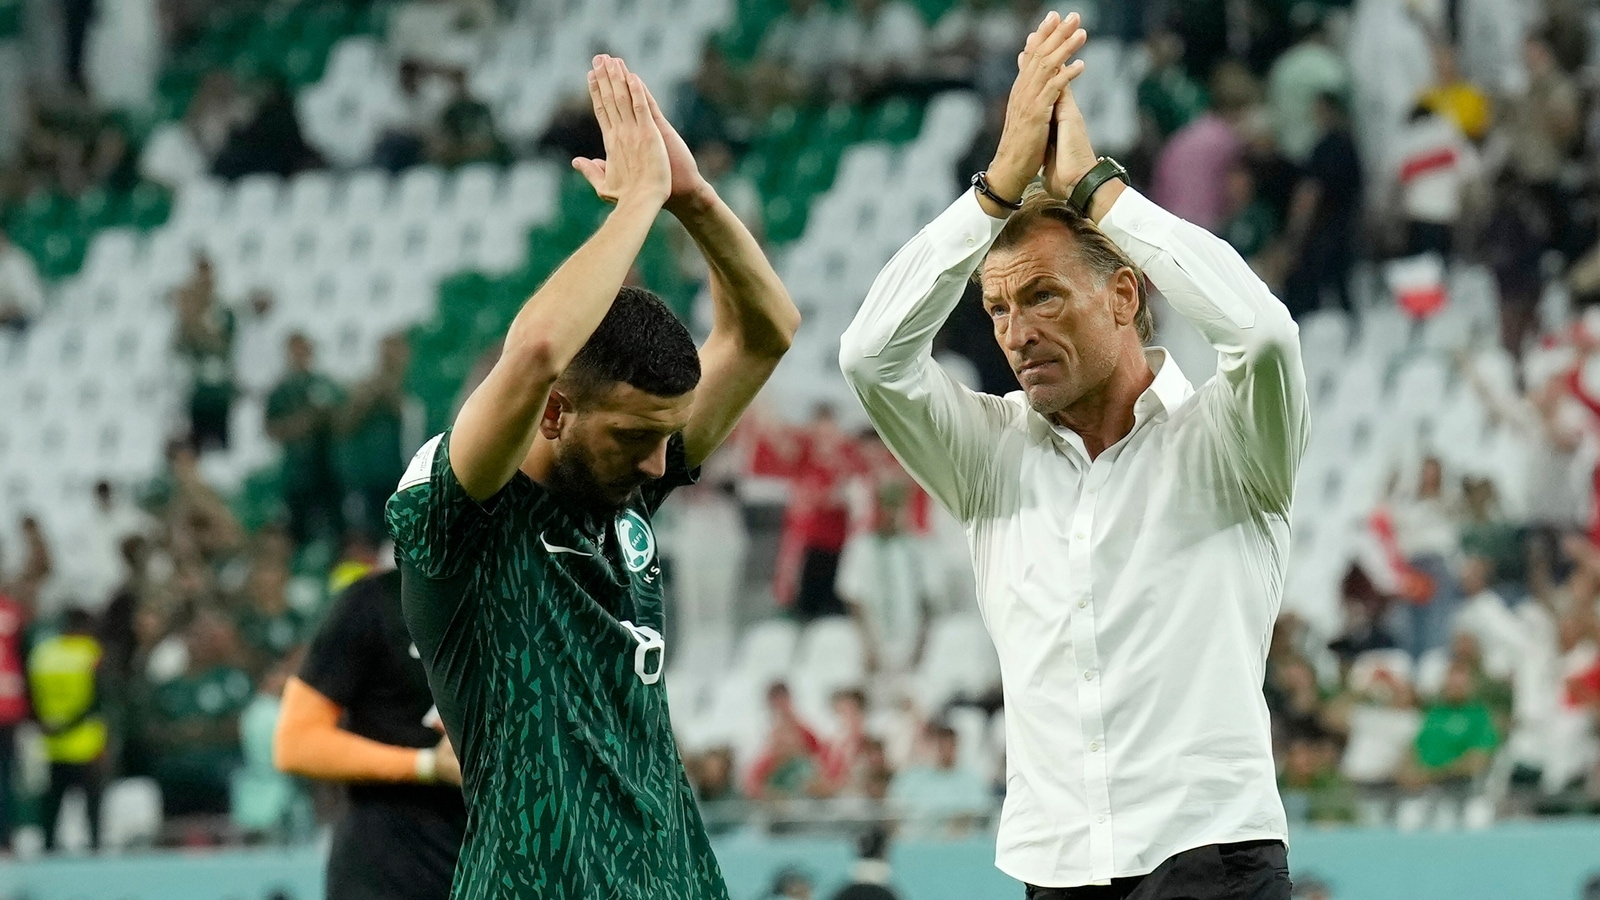 Saudi coach not dwelling on 'crazy' World Cup win over Argentina